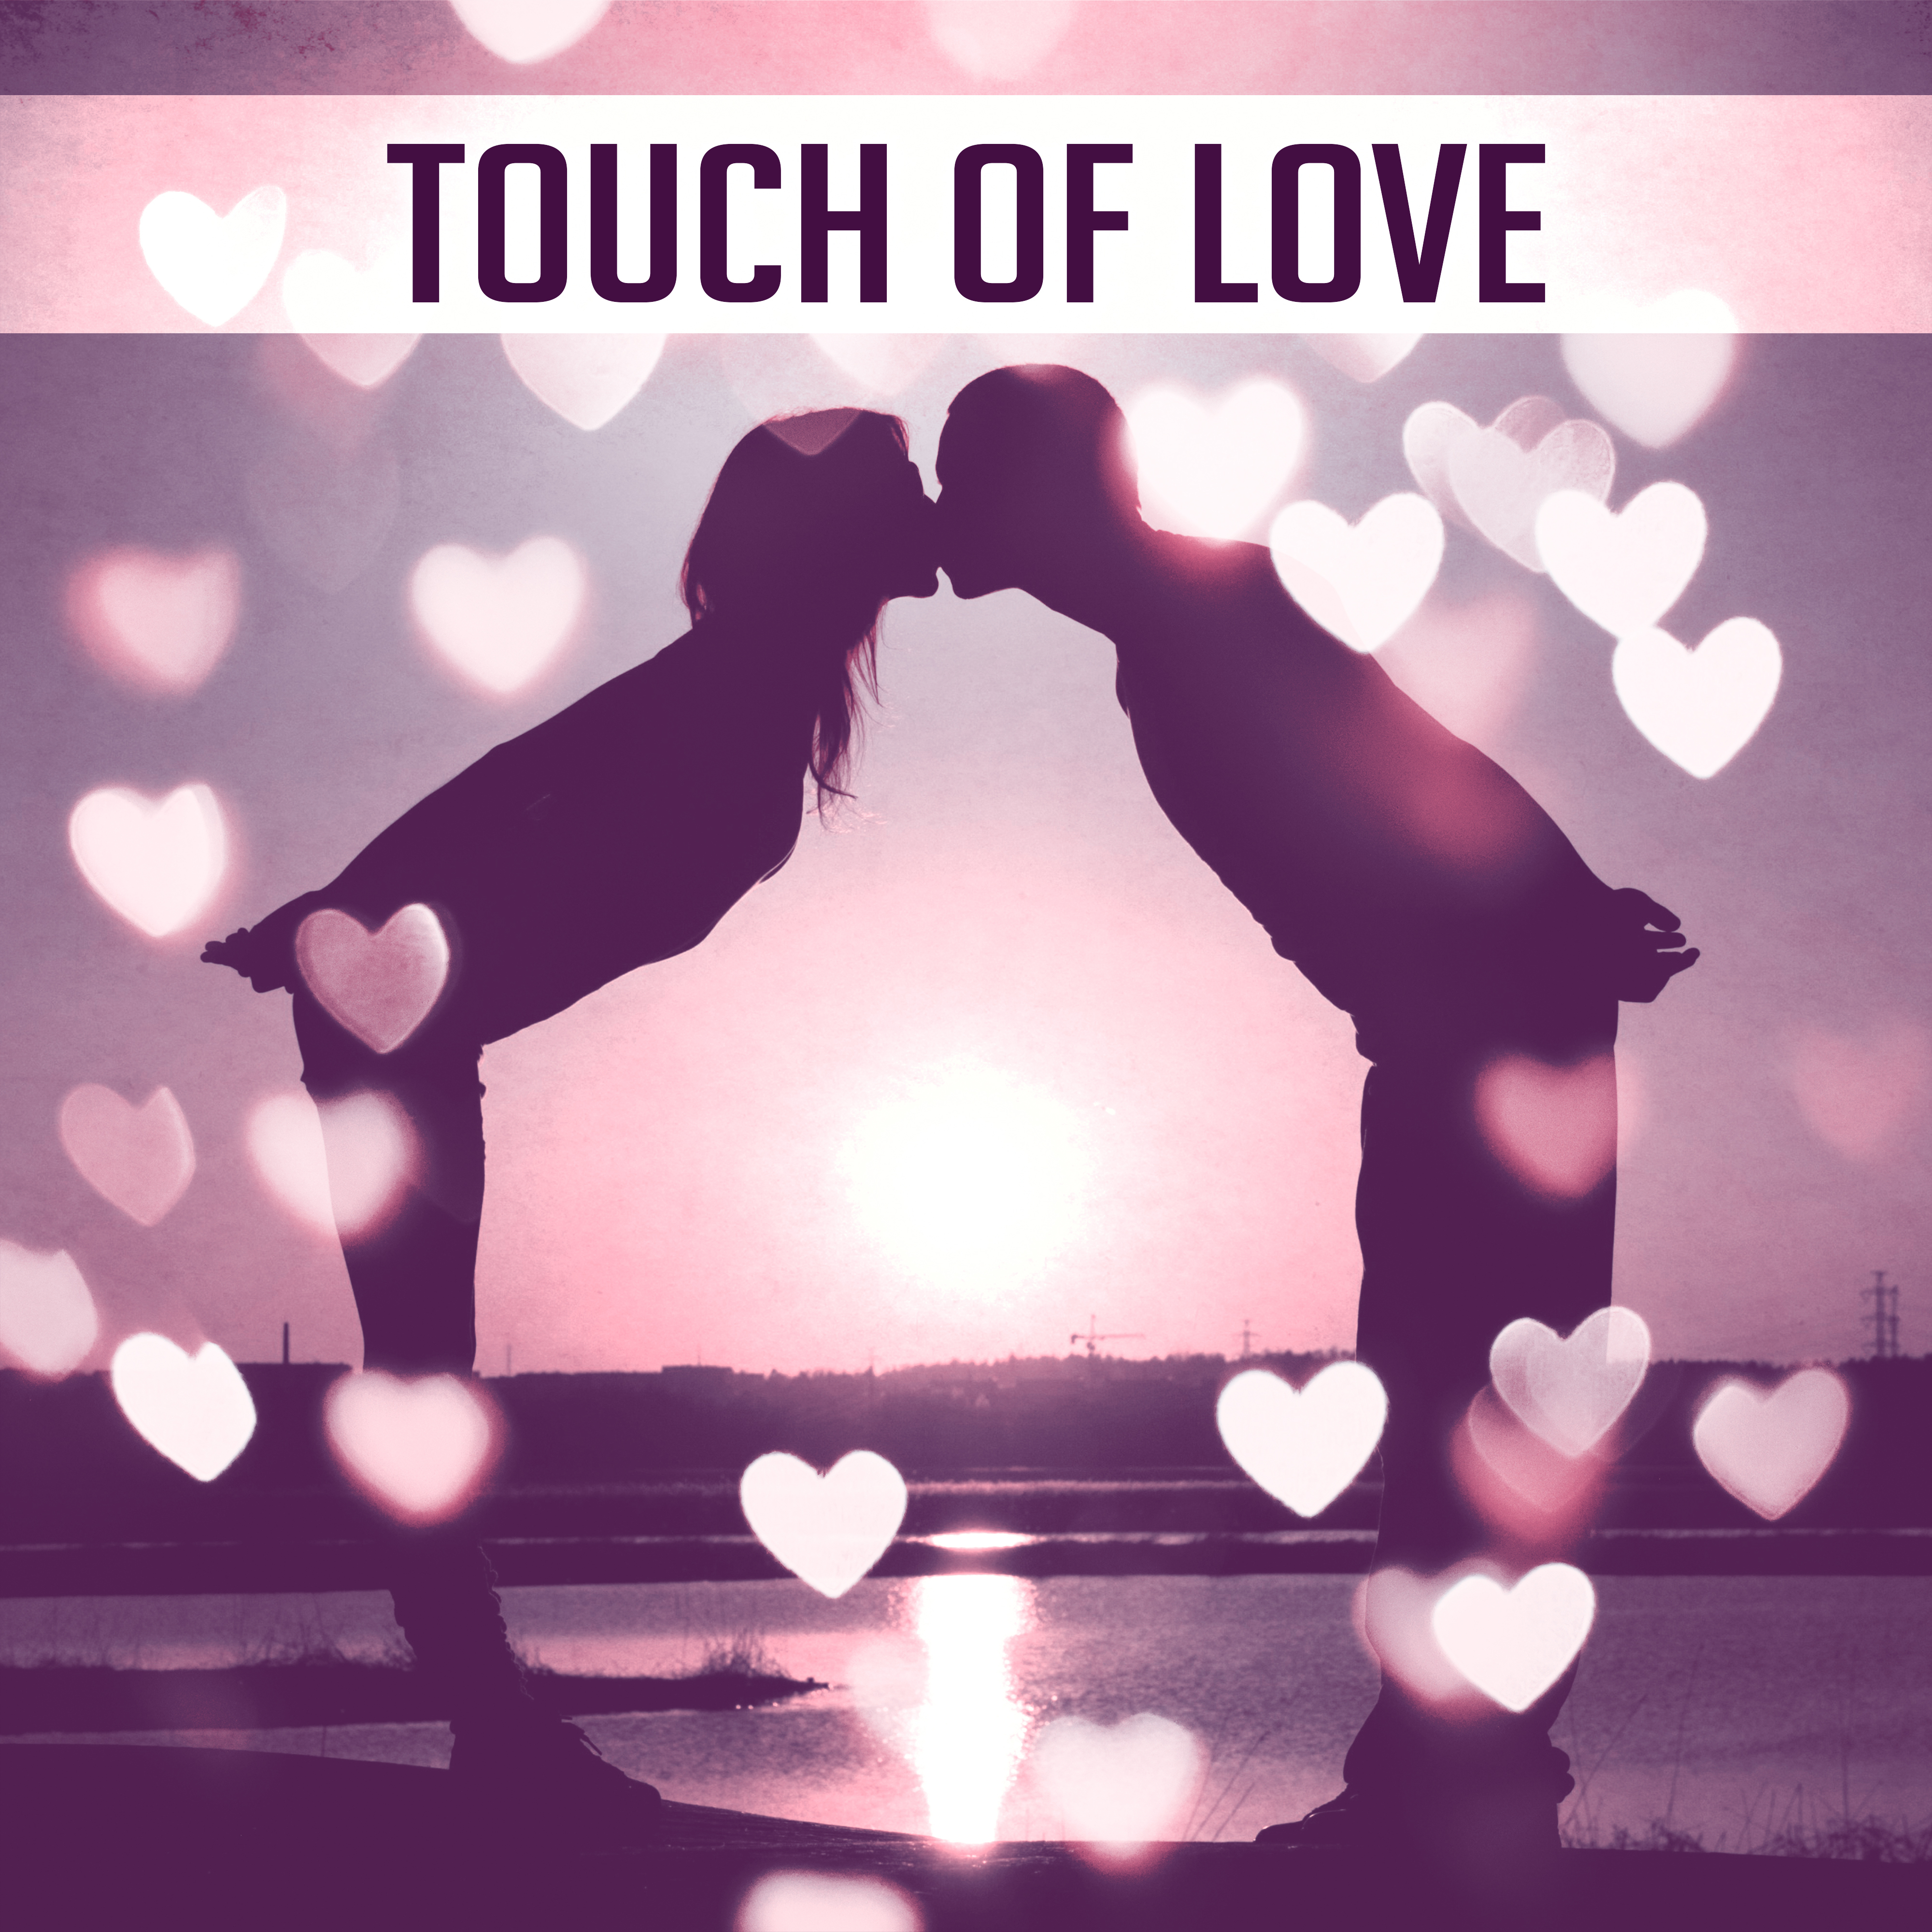 Touch of Love  Sensual Jazz Music, Romantic Time for Two, Real Feeling, Erotic Dance,  Jazz, Dinner by Candlelight